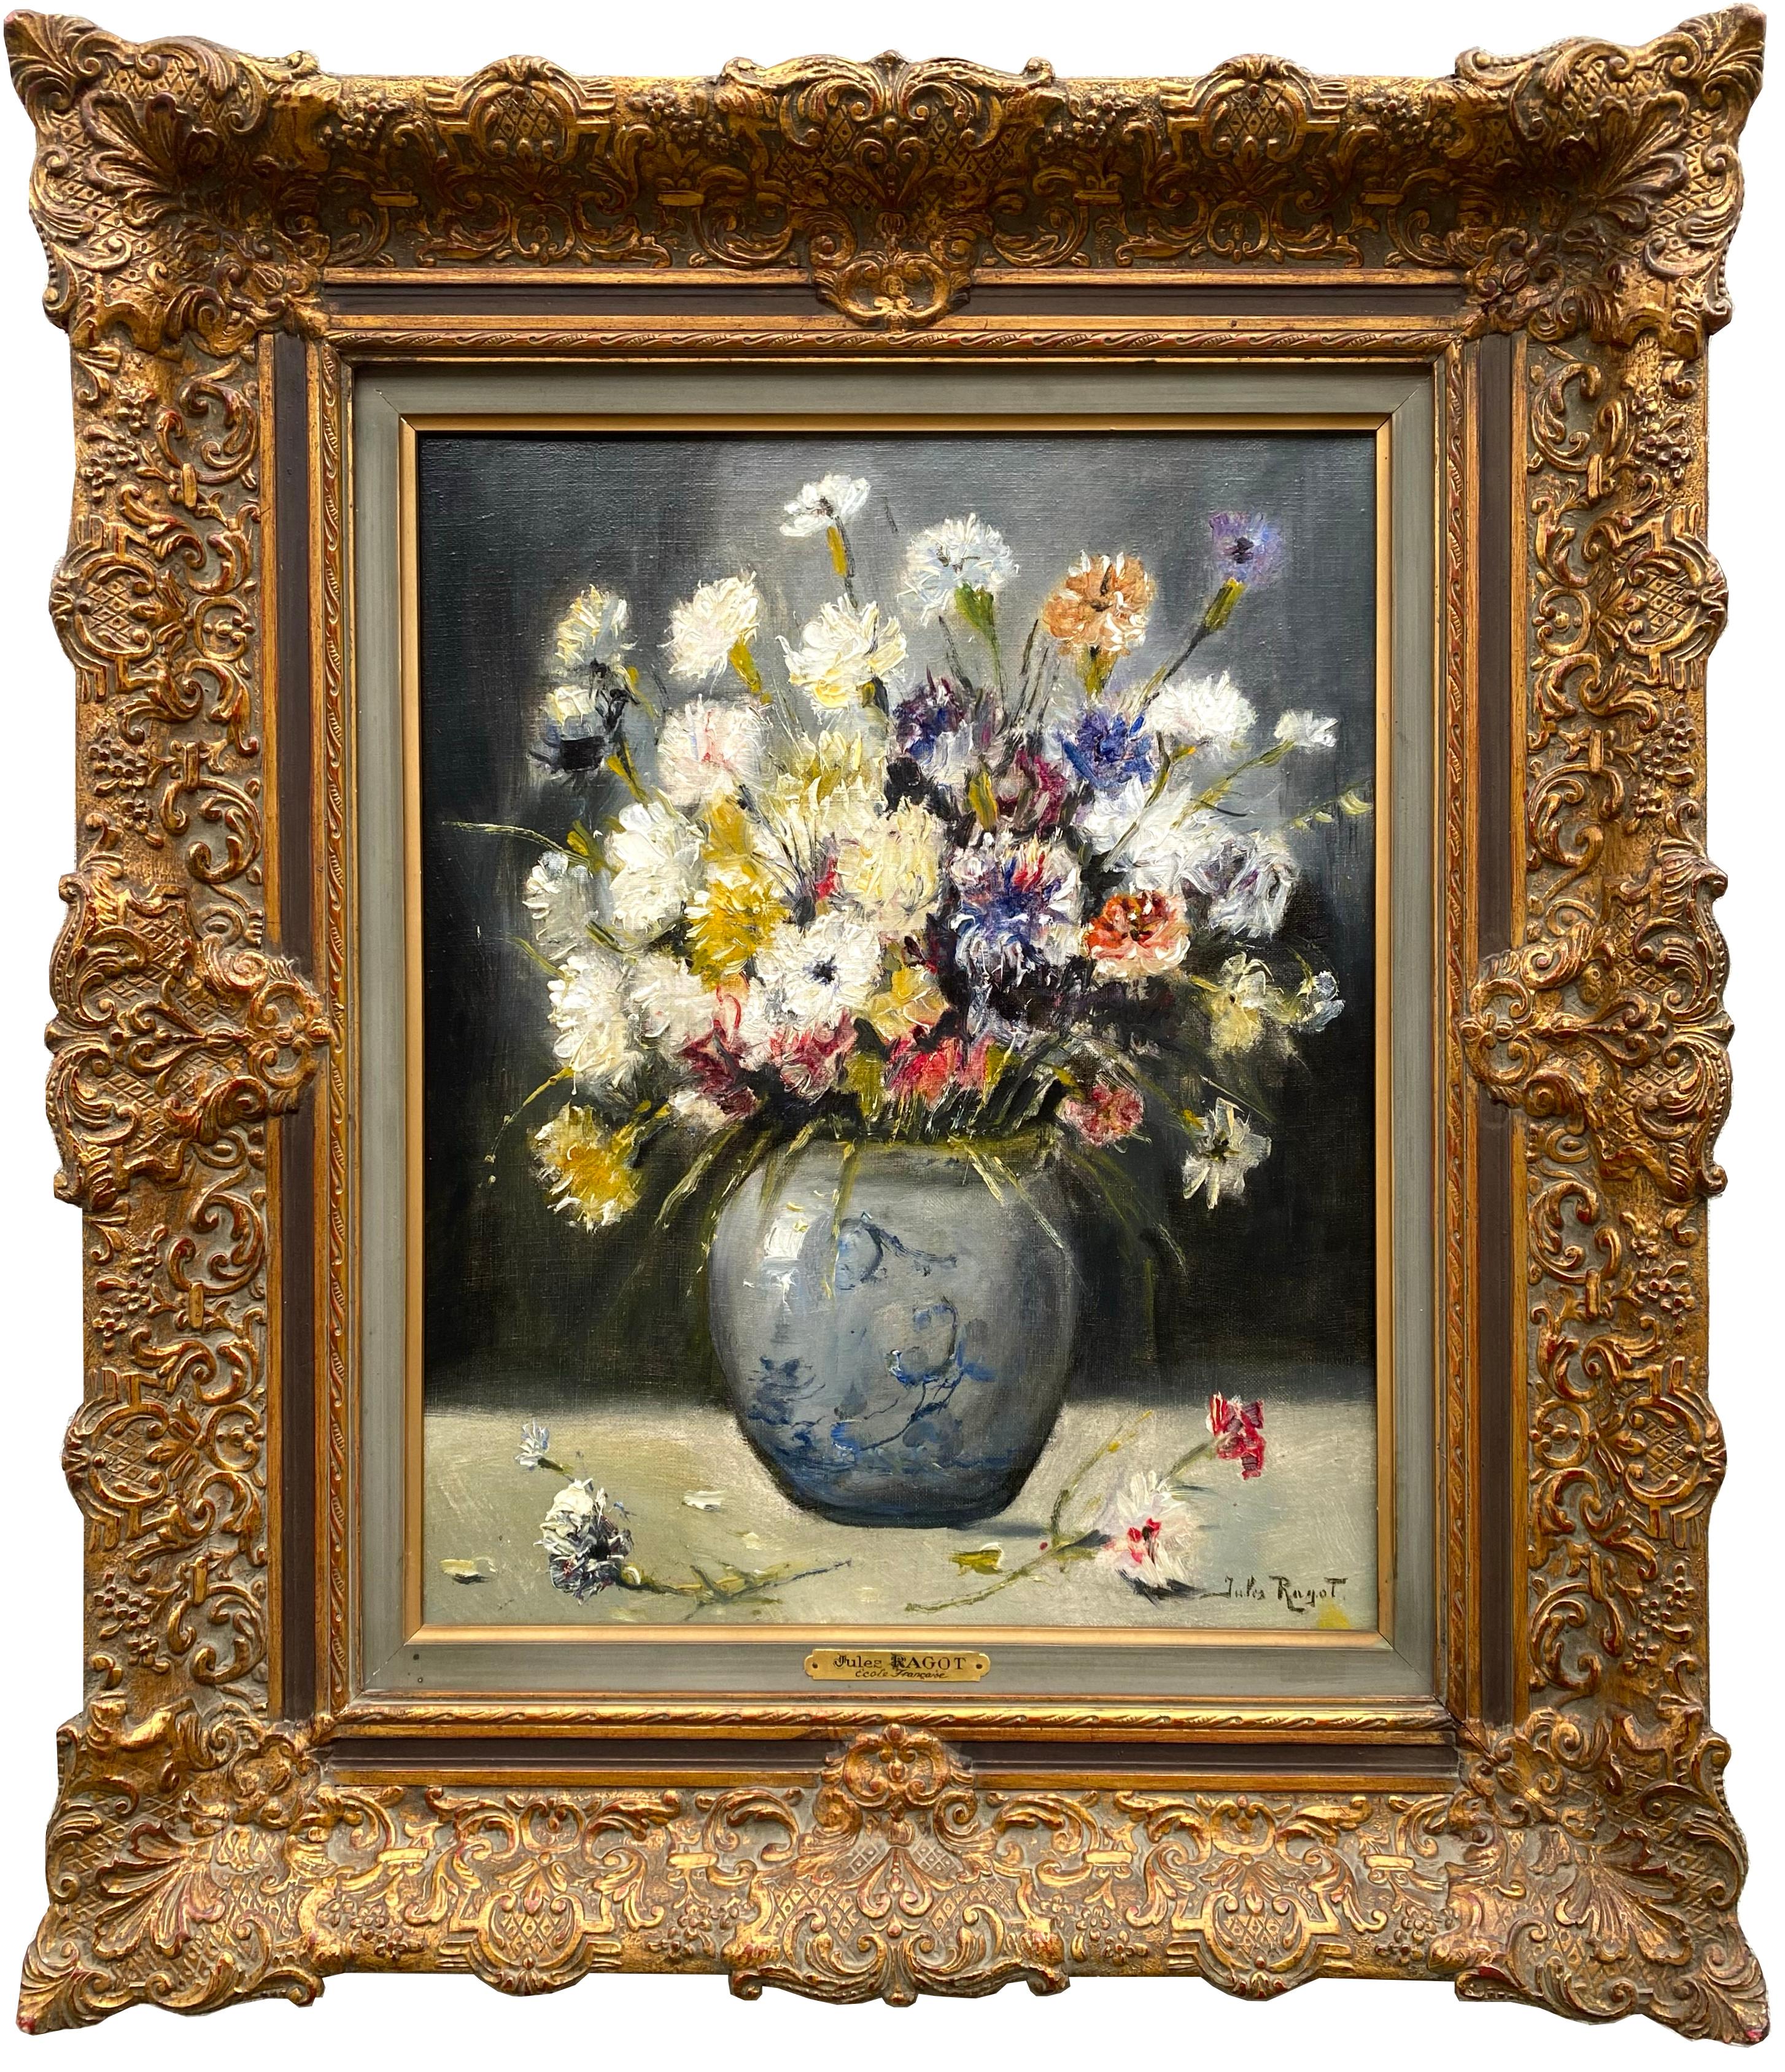 Ragot Jules Félix
Paris 1835 – 1912 Brussels
French Painter

'StillLlife of Wild Flowers'
Signature: Signed lower right
Medium: Oil on canvas
Dimensions: Image size 50 x 40 cm, frame size 72 x 62,50 cm

Biography: Ragot Jules Félix, born in Paris in